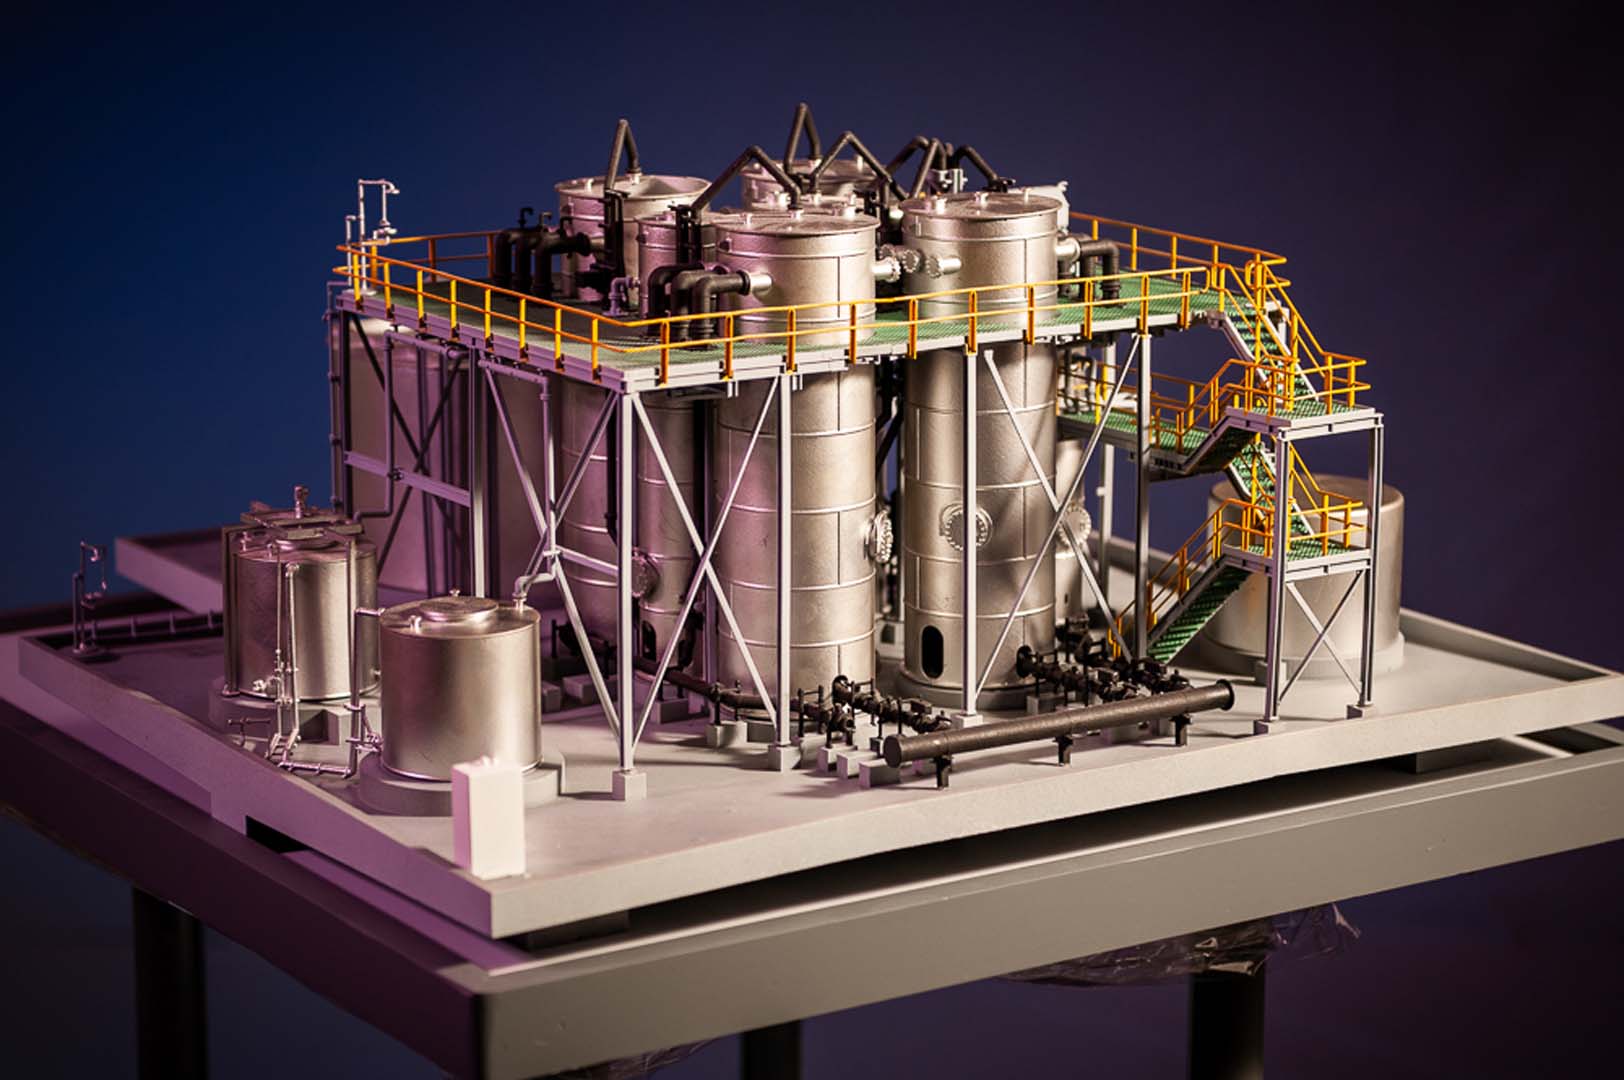 3D Printed colour model of industrial processing plant